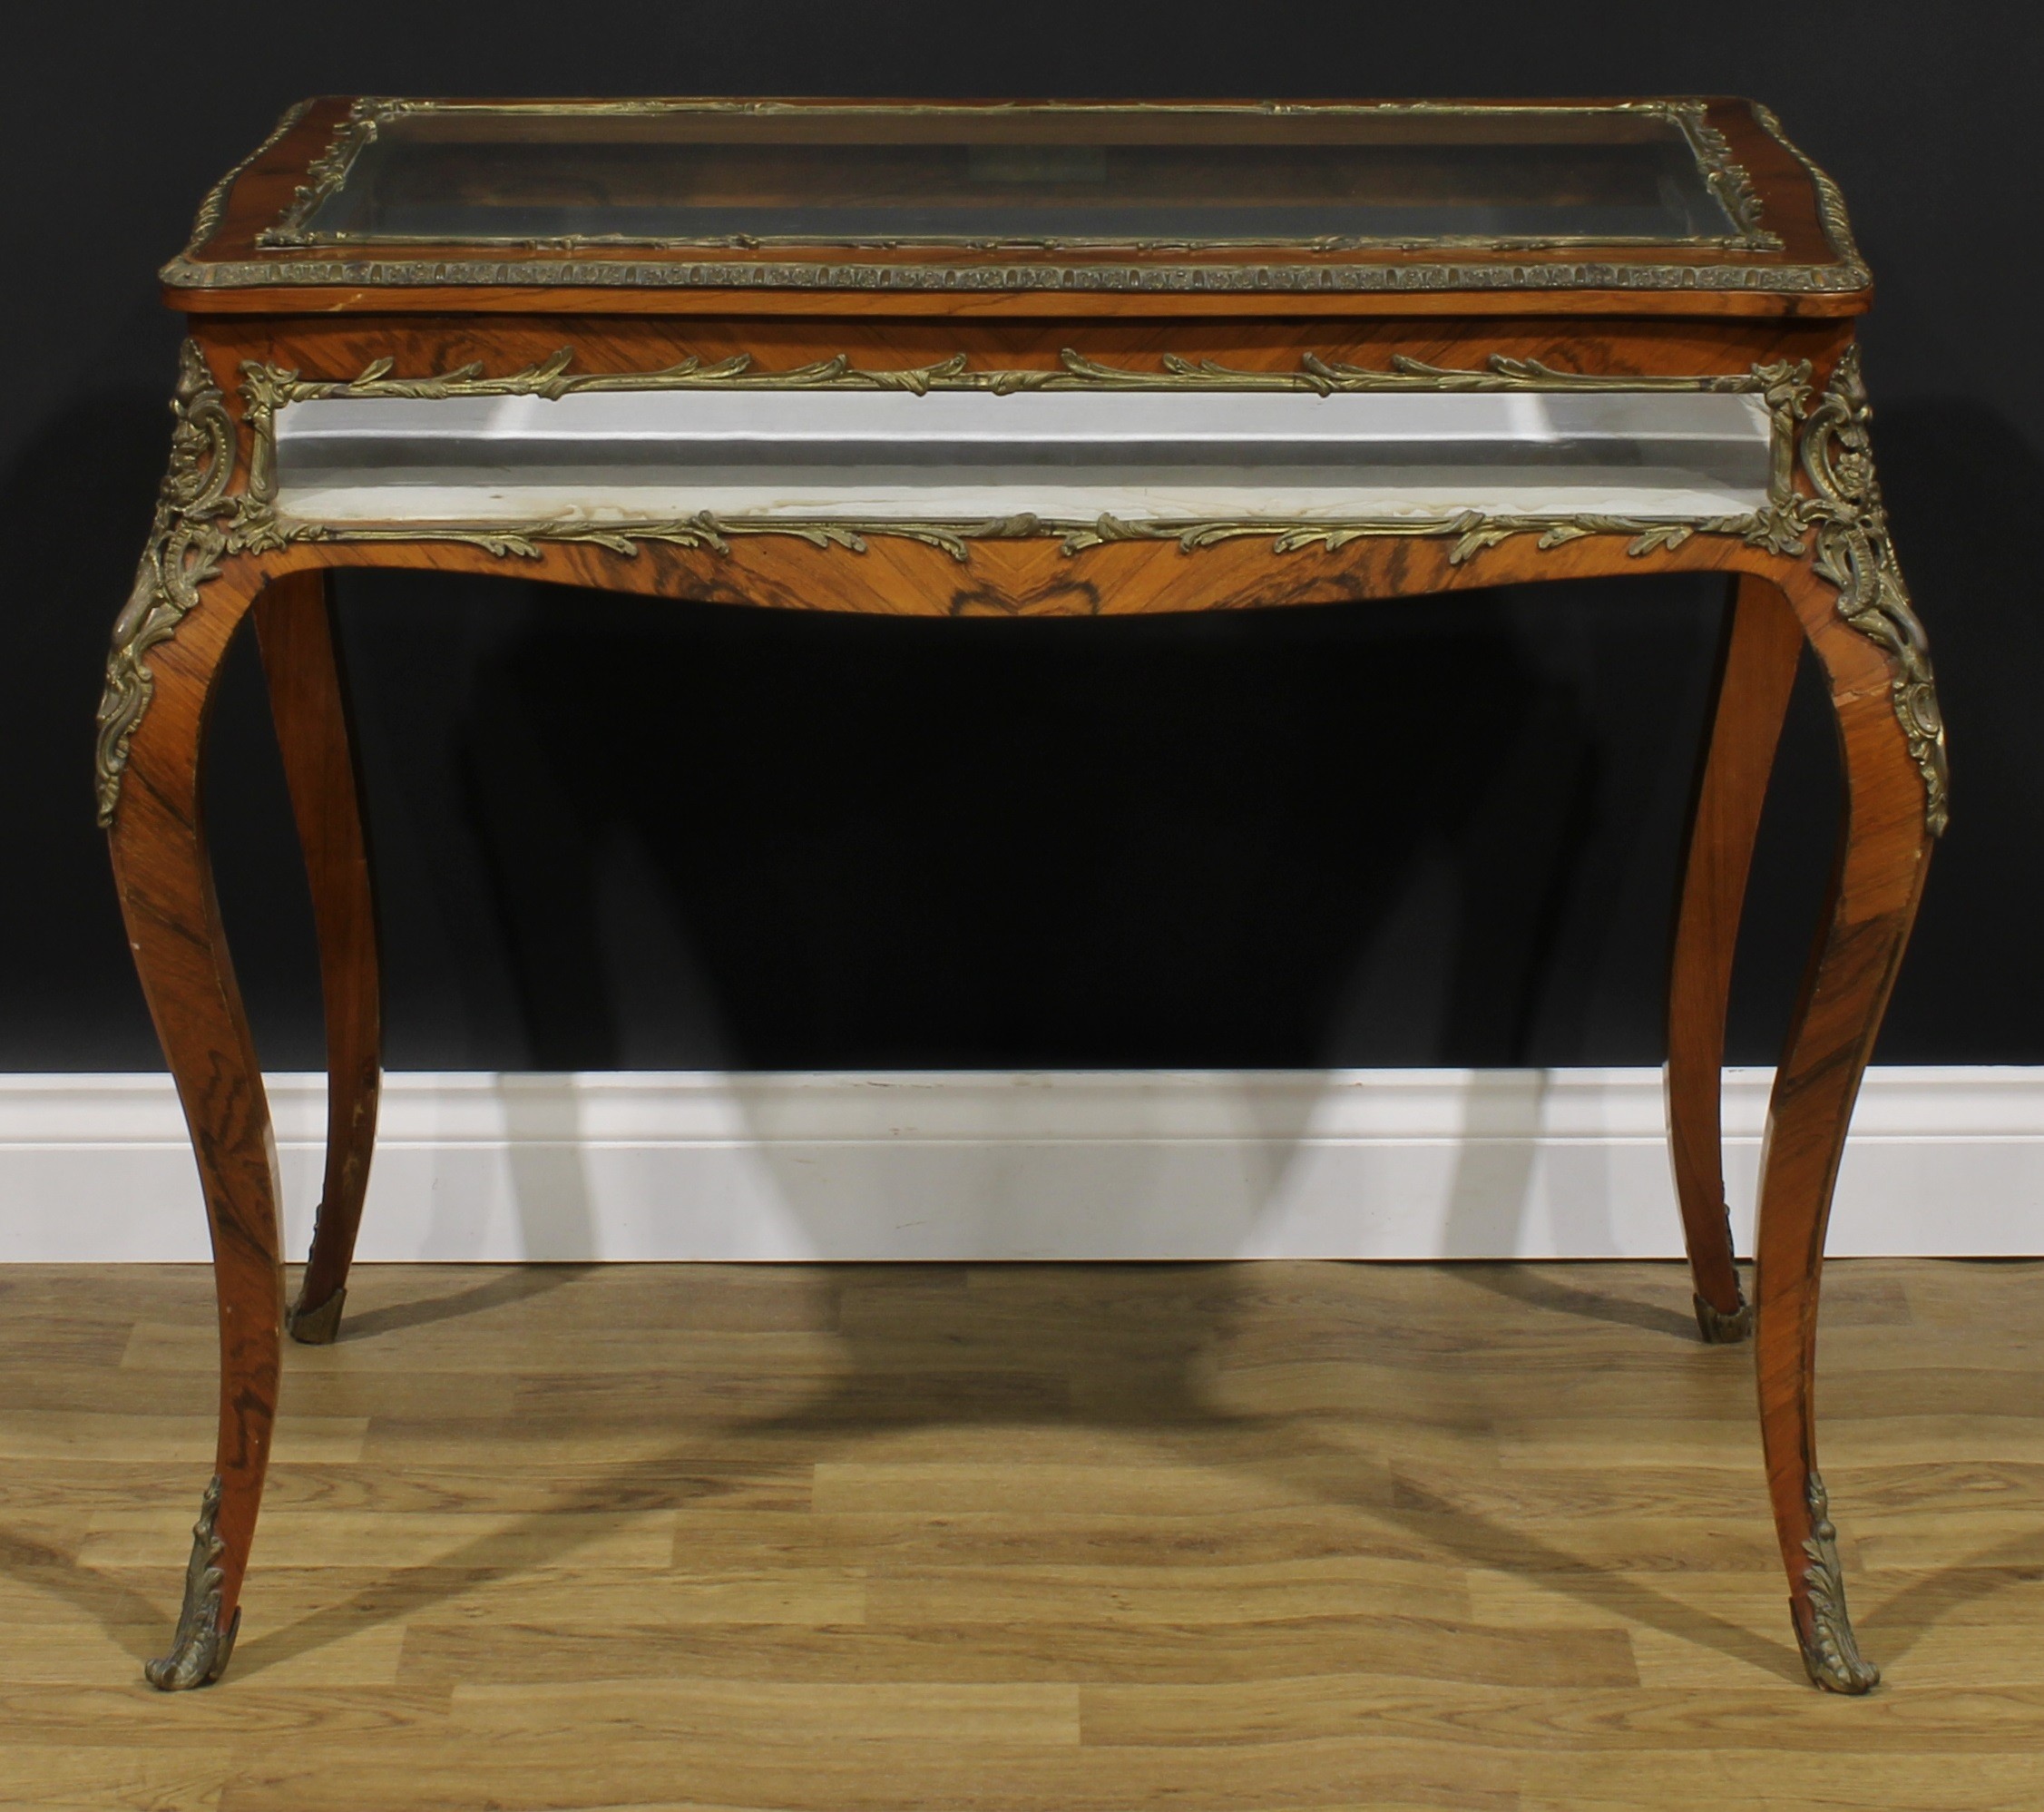 A Louis XV Revival gilt metal mounted rosewood bijouterie table, hinged top, French cabriole legs, - Image 4 of 4